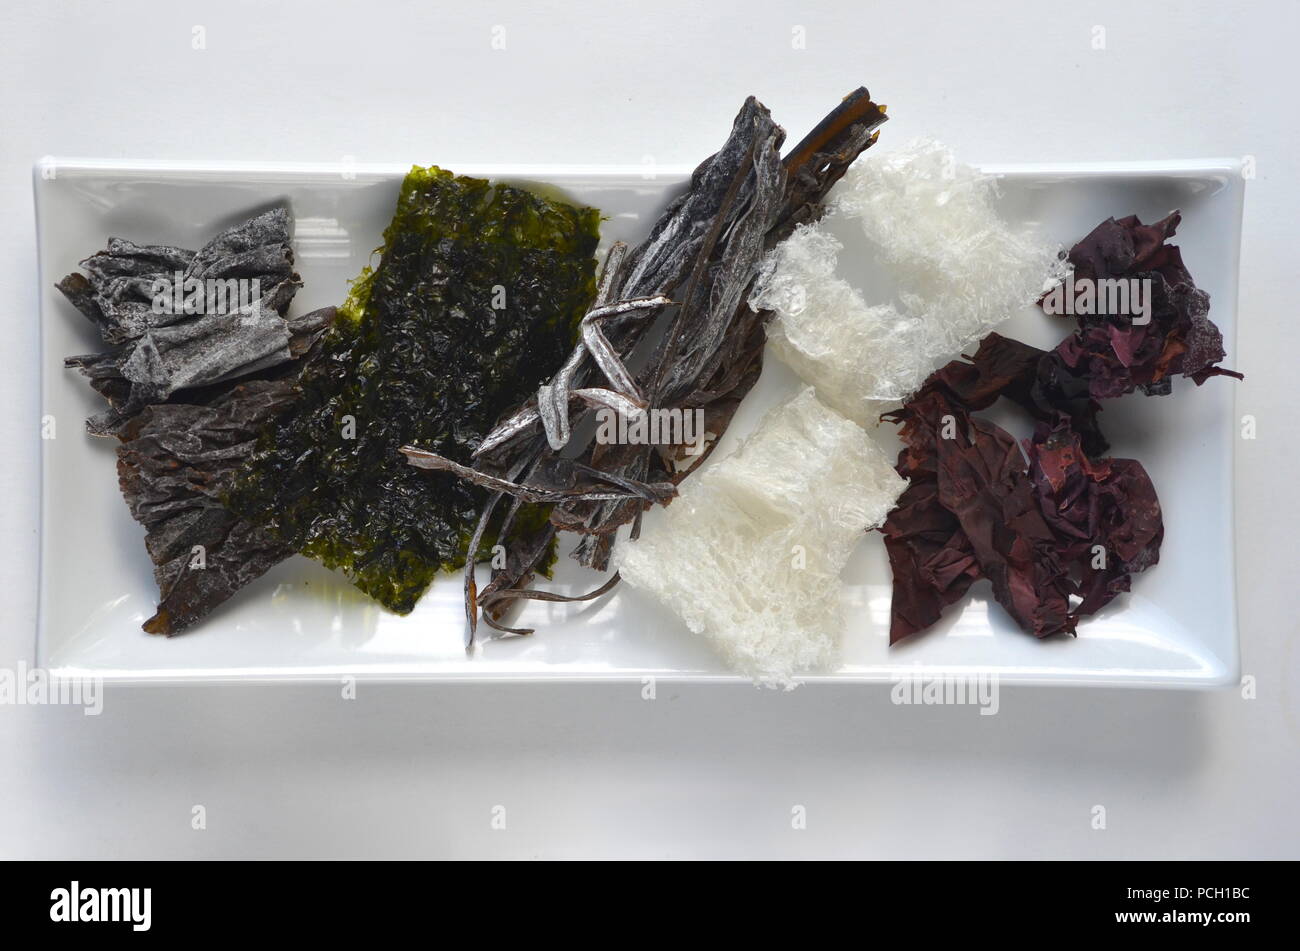 Detail top view of dried seaweed: nori, dulse, kelp, wakame, agar agar, alaria. Isolated on white.Nutrient rich vegan, raw and healthy sea vegetables. Stock Photo